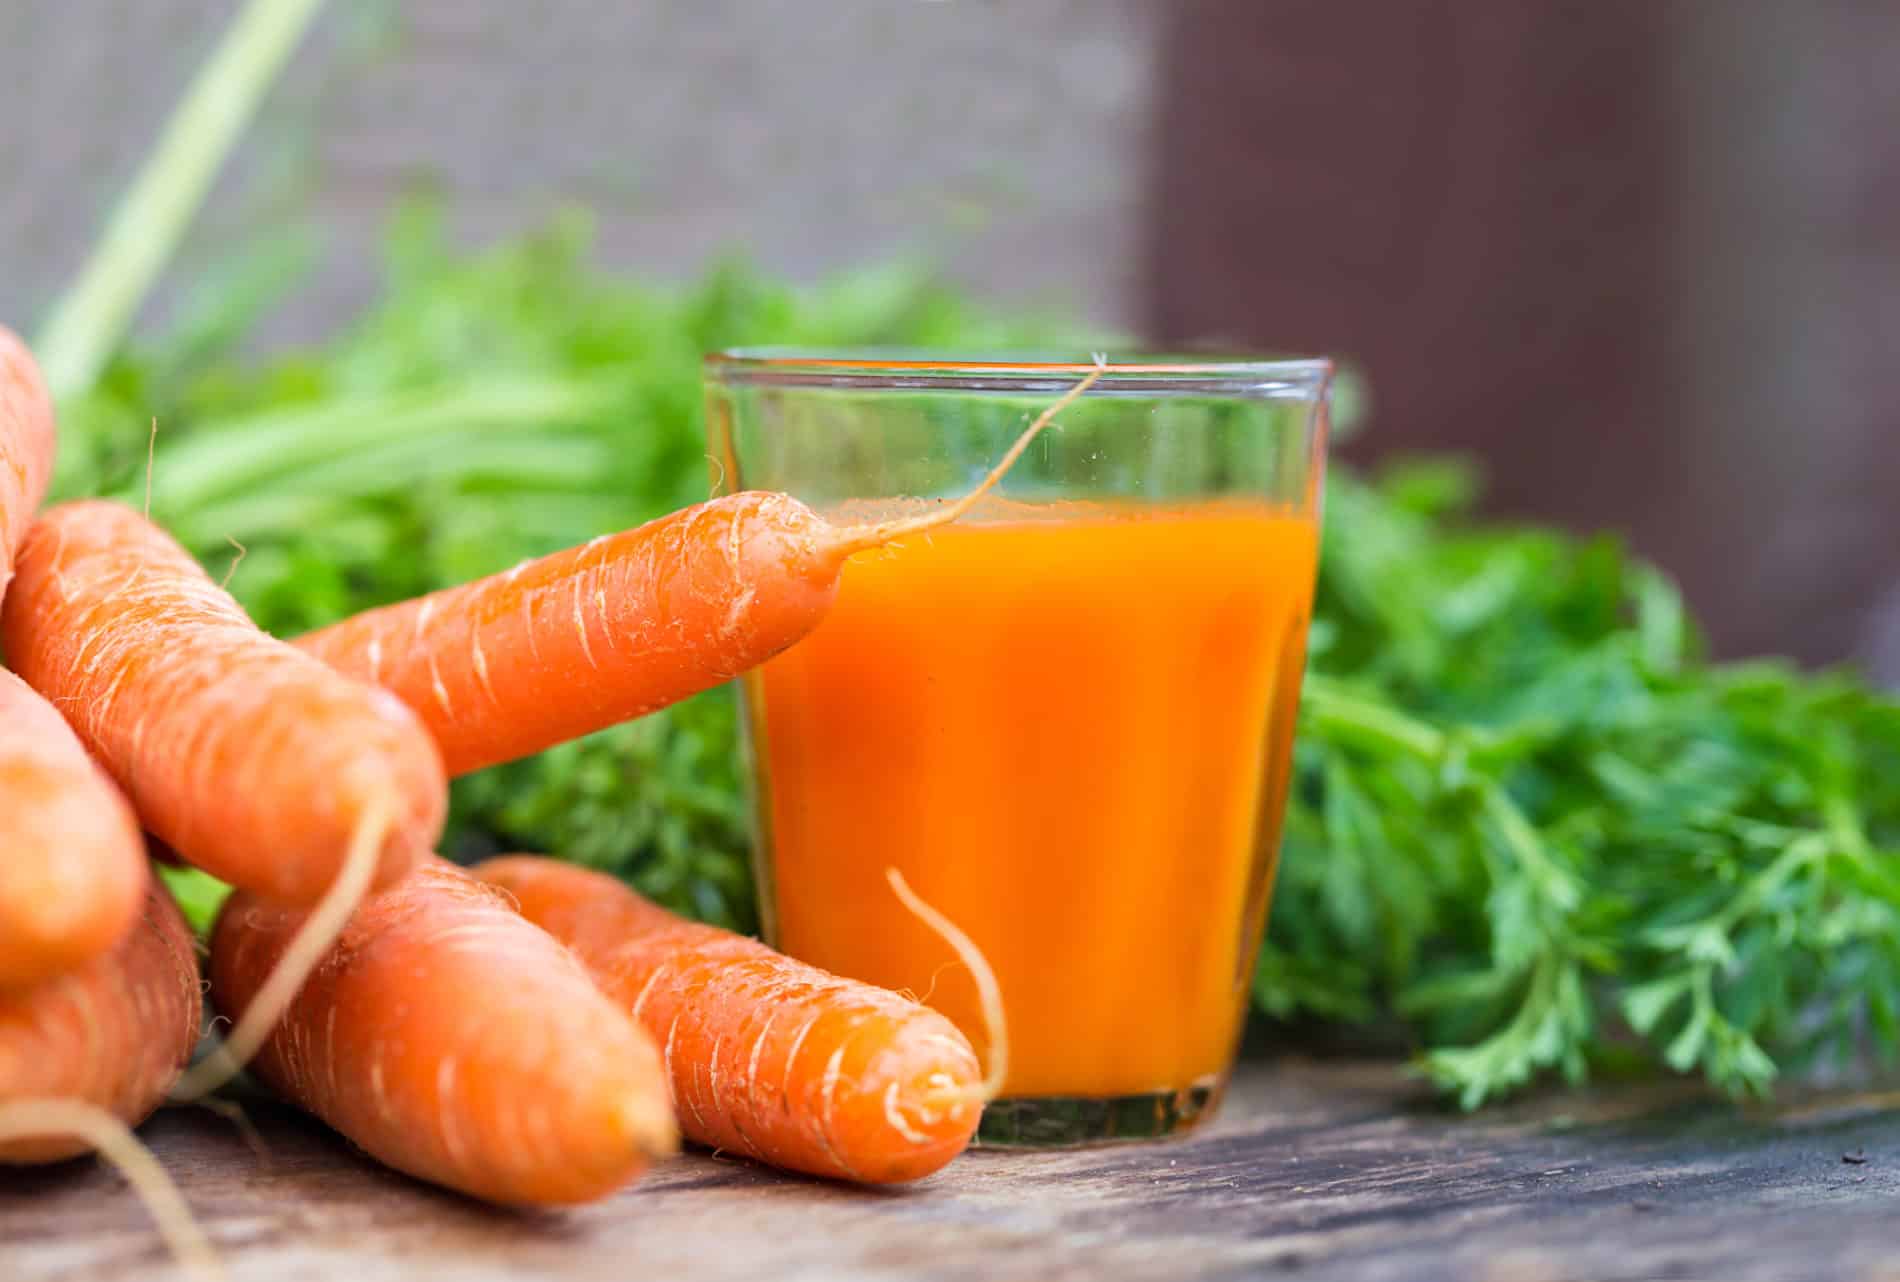 How Do You Make Carrot Juice Ingredients From Pidie City